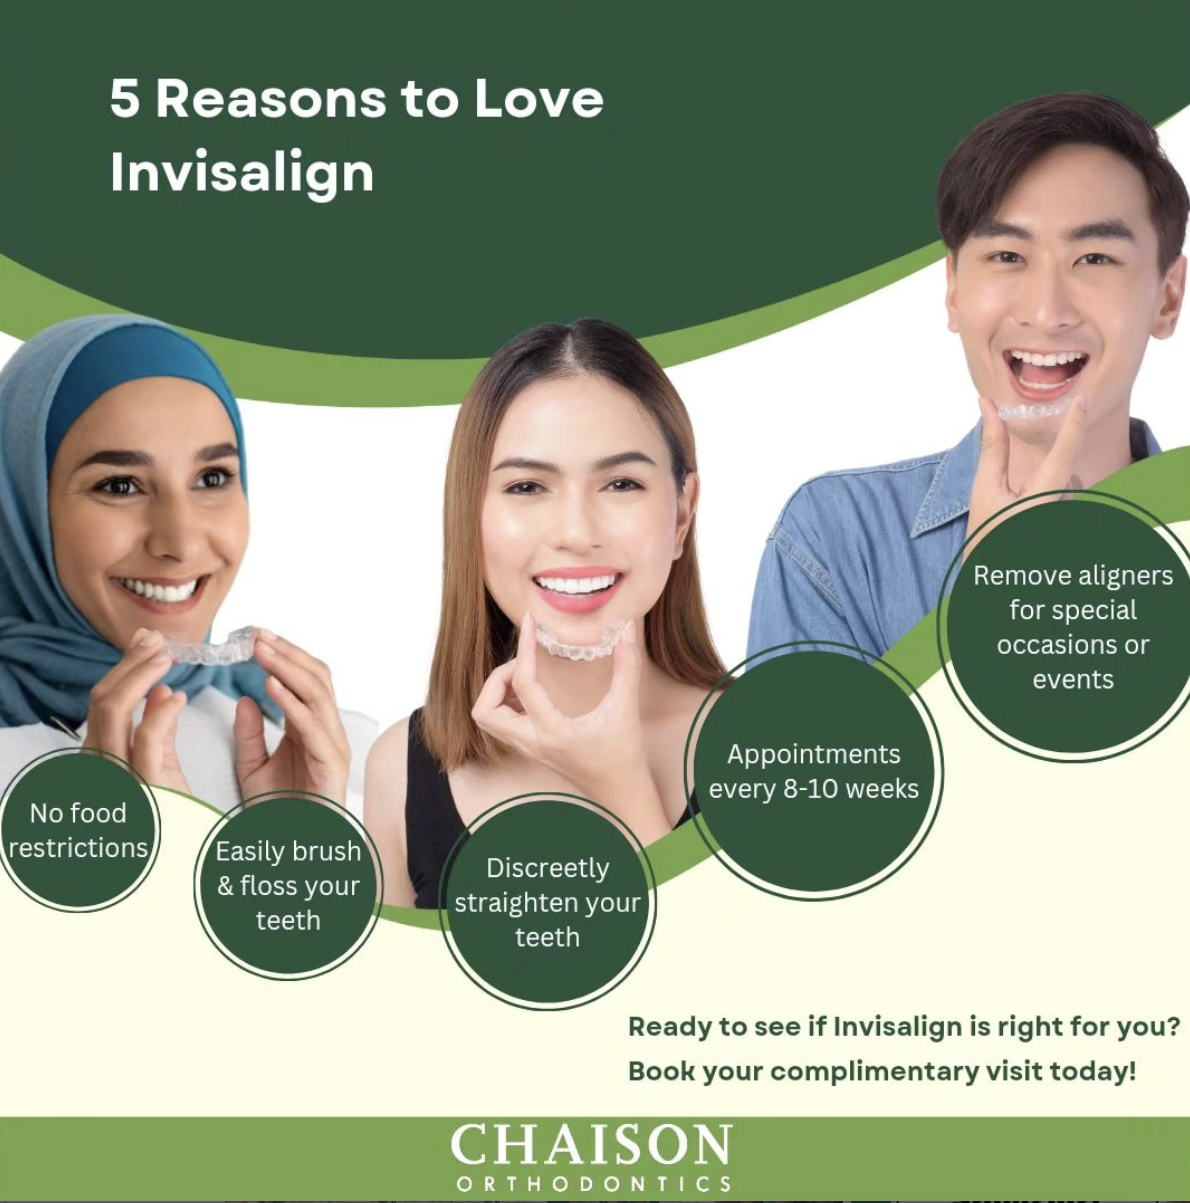 Five Reasons to Love Invisalign at Chaison Orthodontics